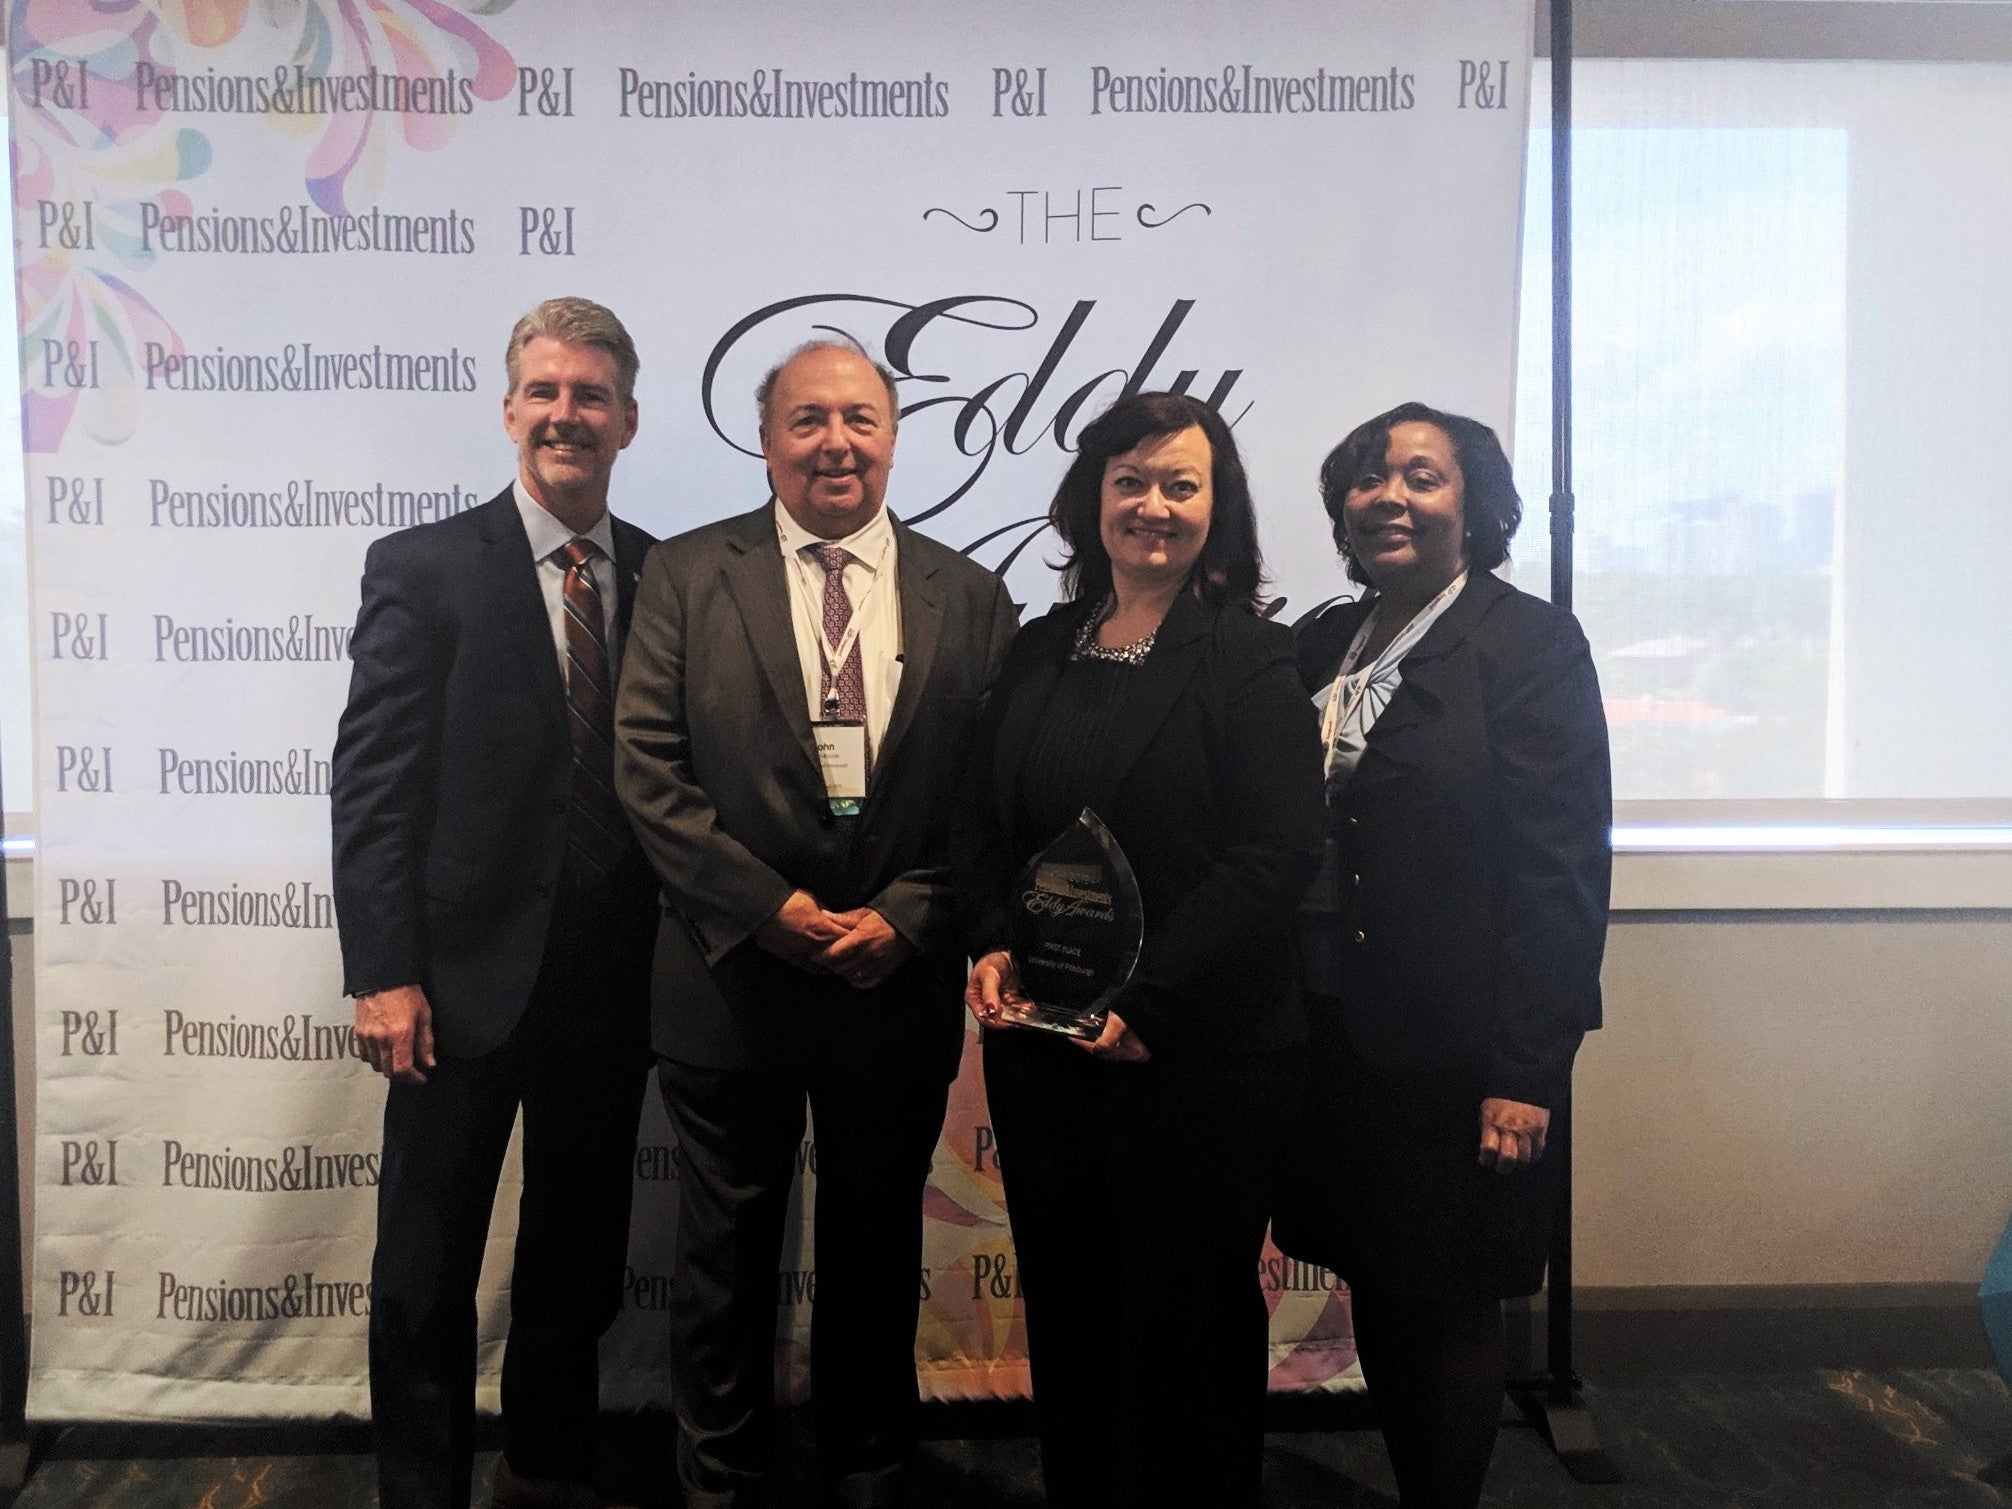 Pitt wins 2019 Eddy Award; Pictured (left to right): Greg Scott (Senior Vice Chancellor, Business & Operations), John Kozar (Assistant Vice Chancellor, OHR), Nichole Dwyer (Communications Manager, OHR), and Cheryl Johnson (Vice Chancellor, OHR)